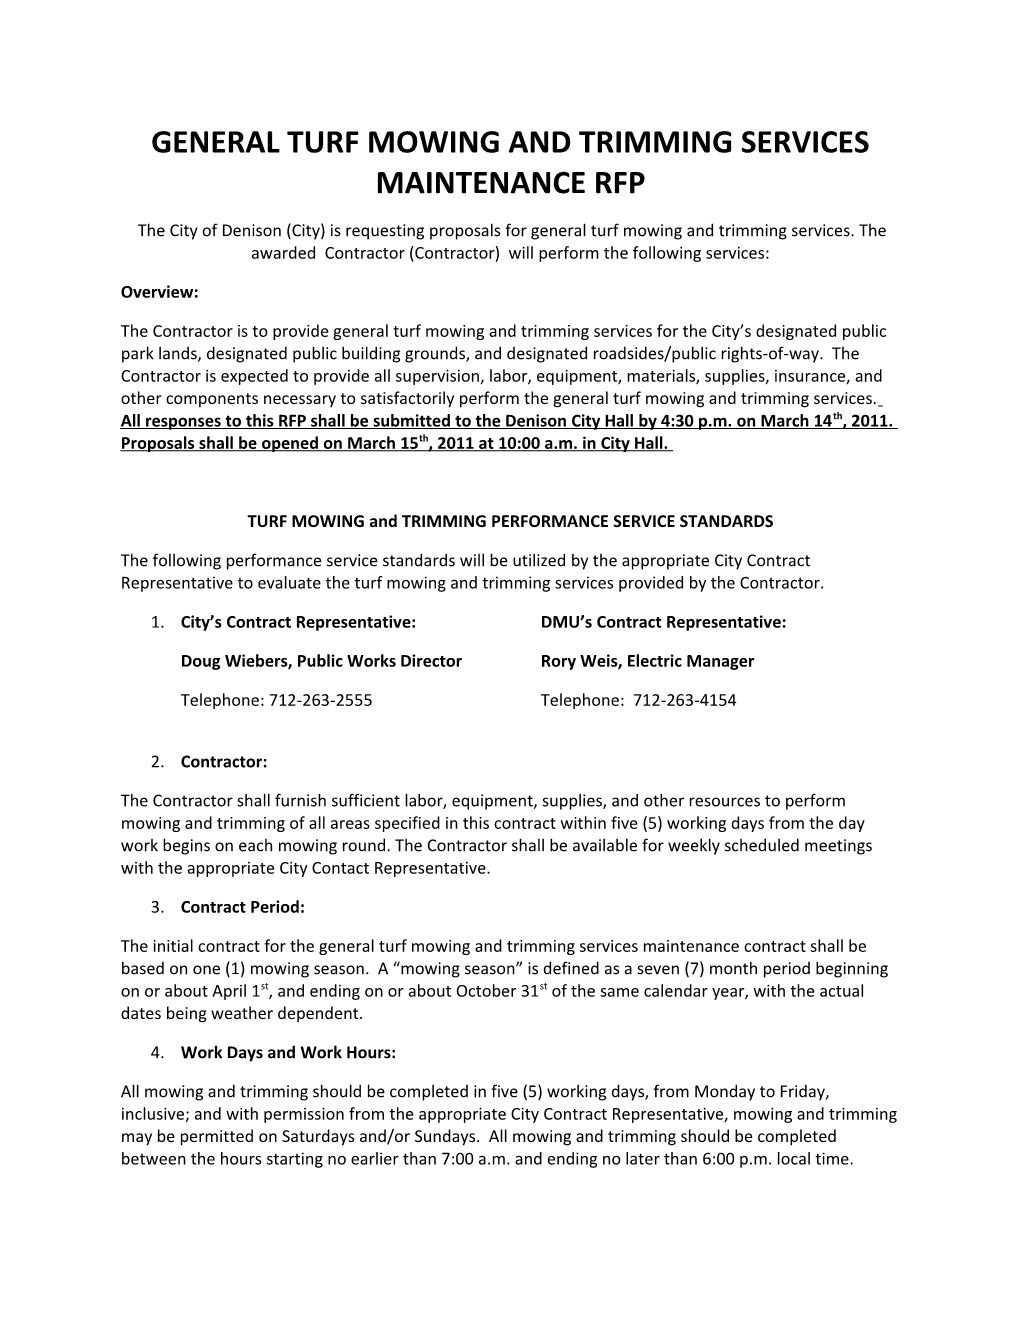 General Turf Mowing and Trimming Services Maintenance Rfp